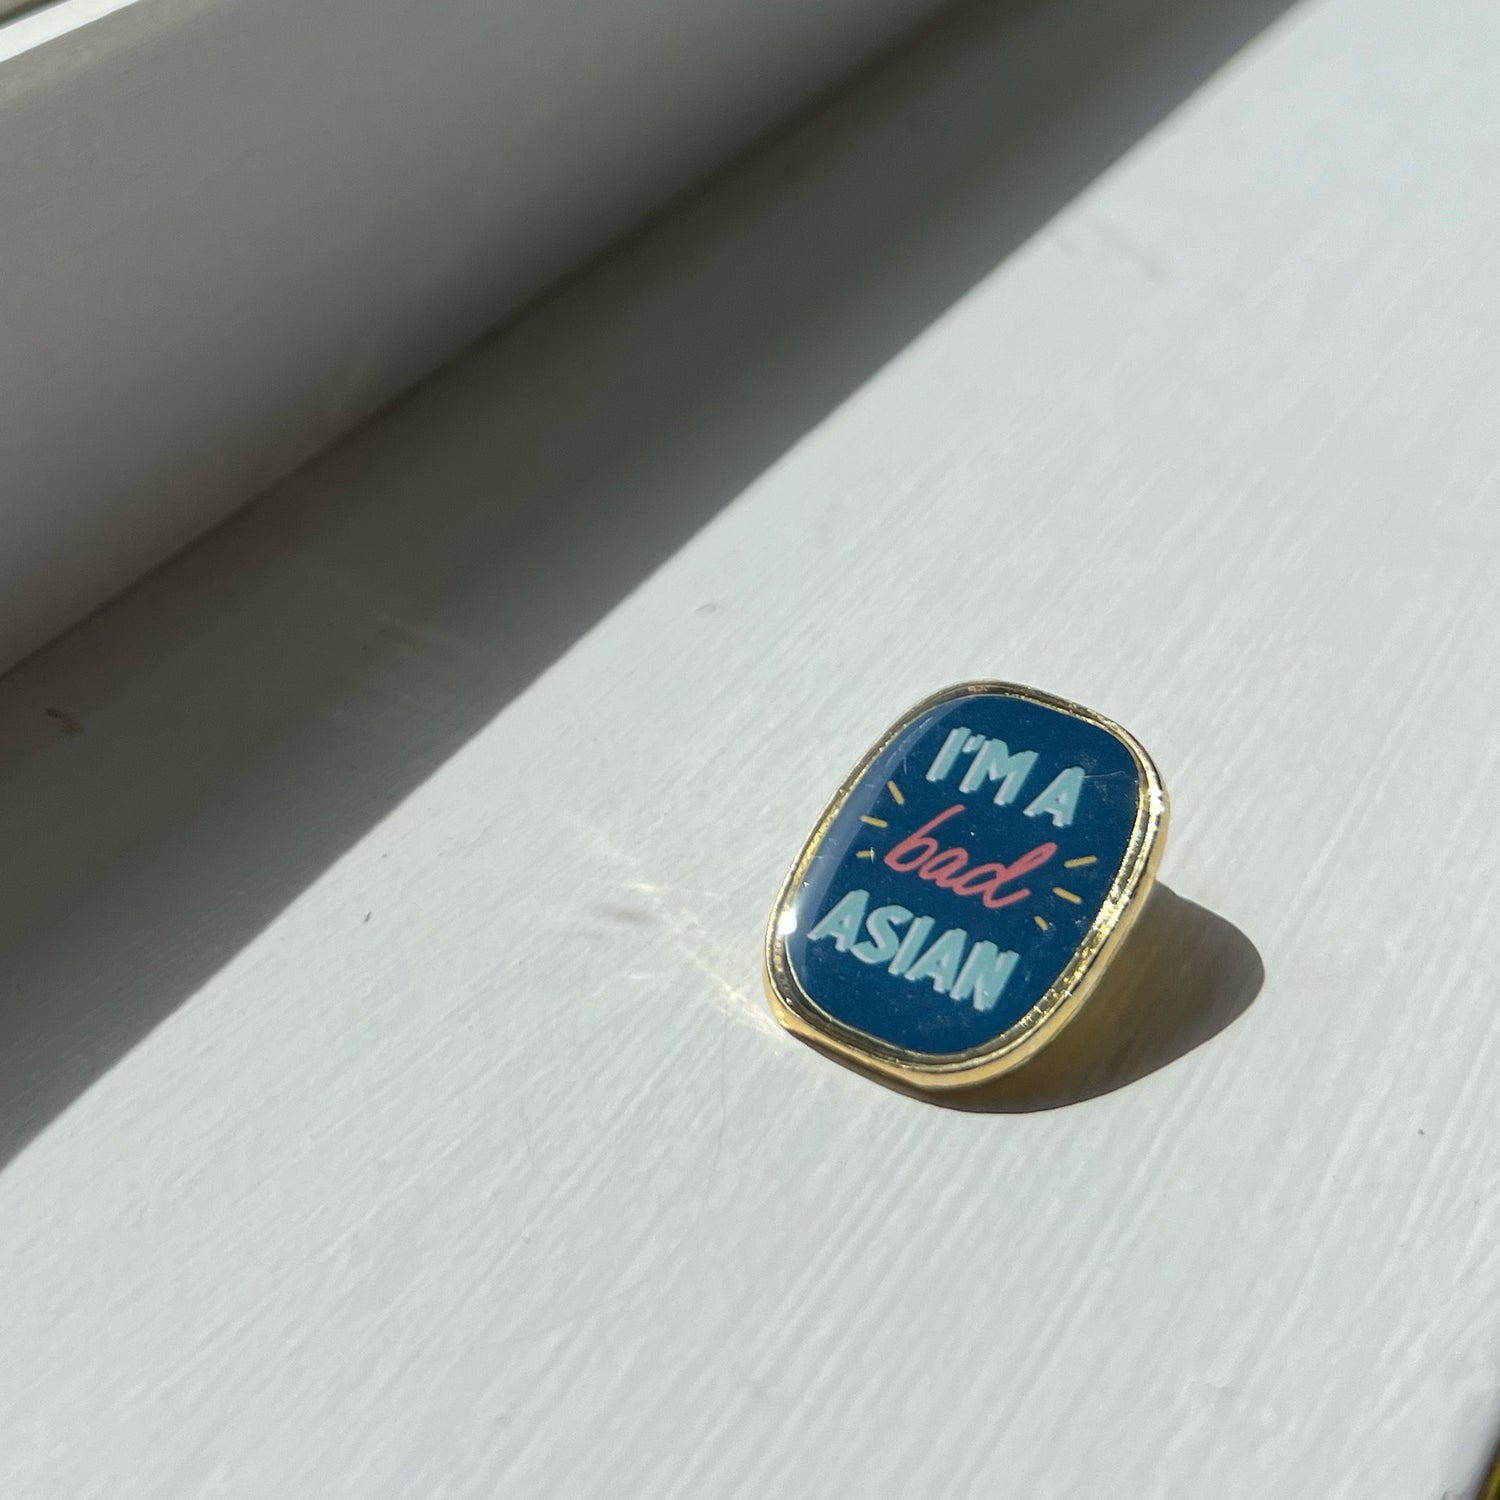 Im a bad Asian lapel pin by I&